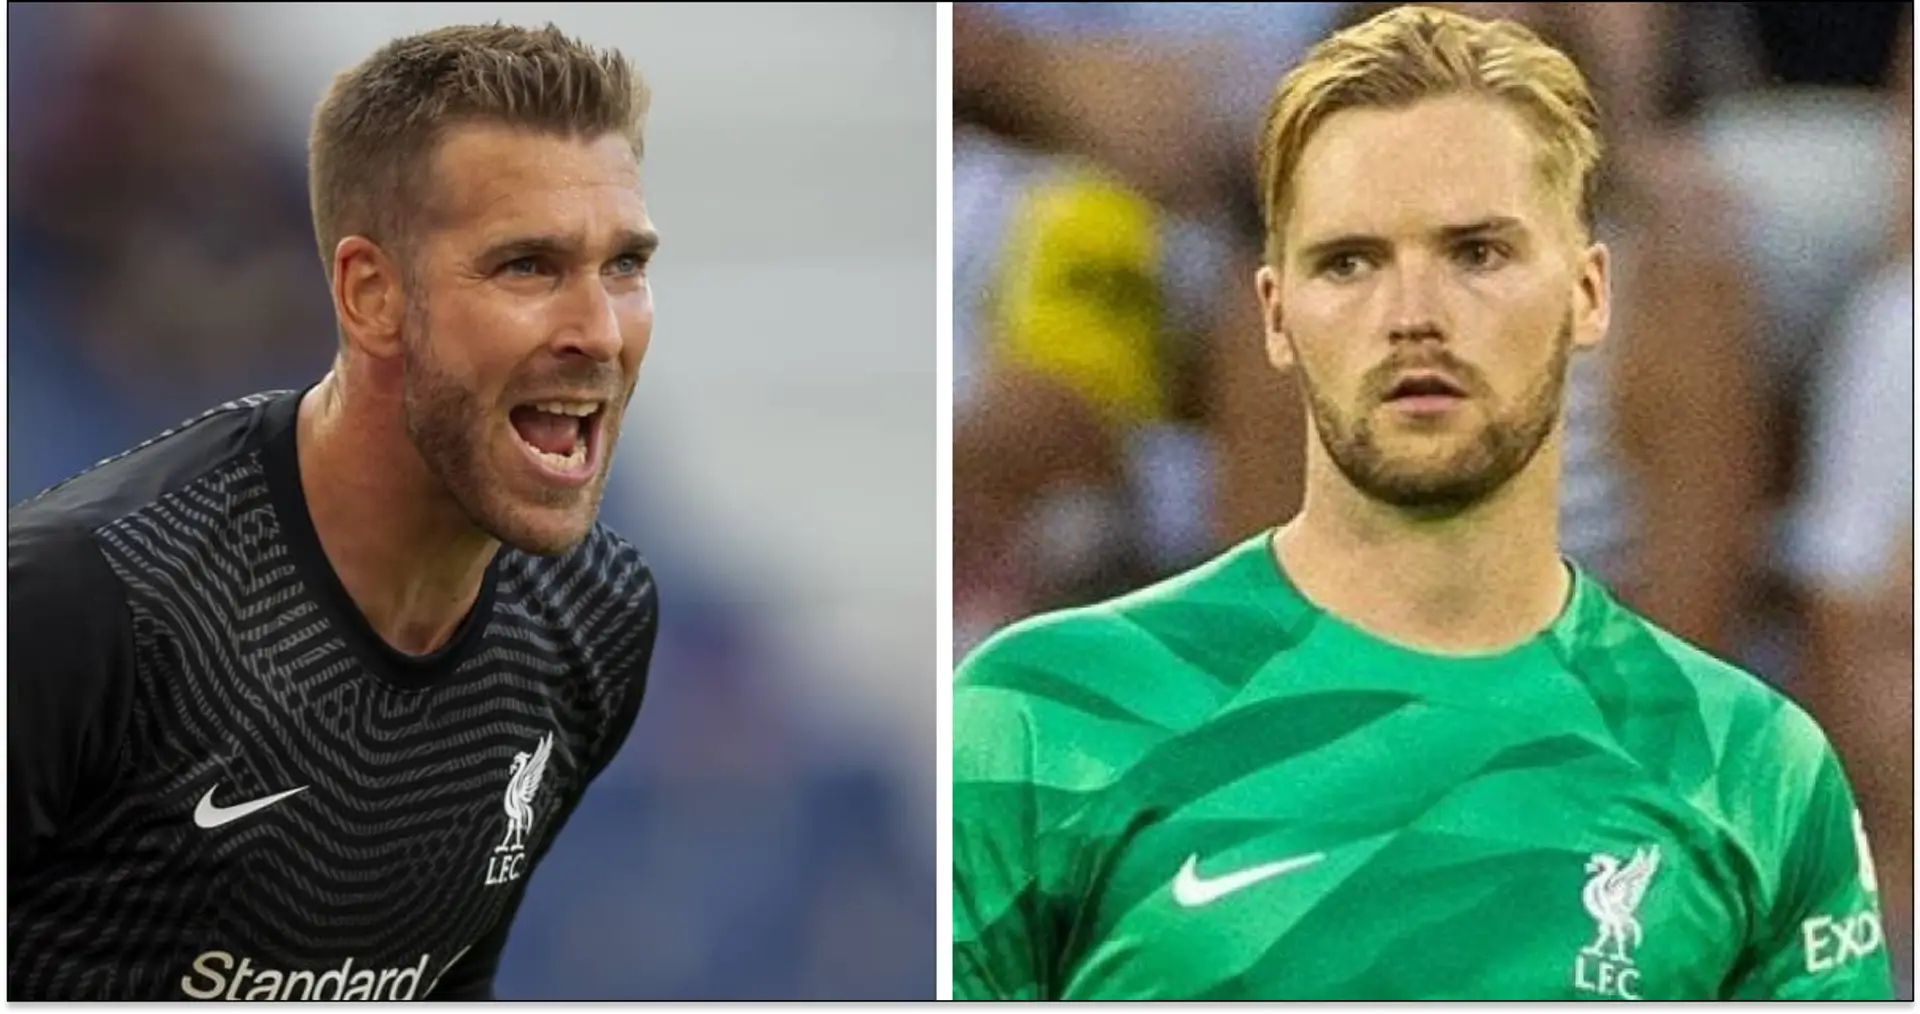 'Kelleher isn’t as good as some of our fans think': Liverpool fan wants Adrian in goal if Alisson injured